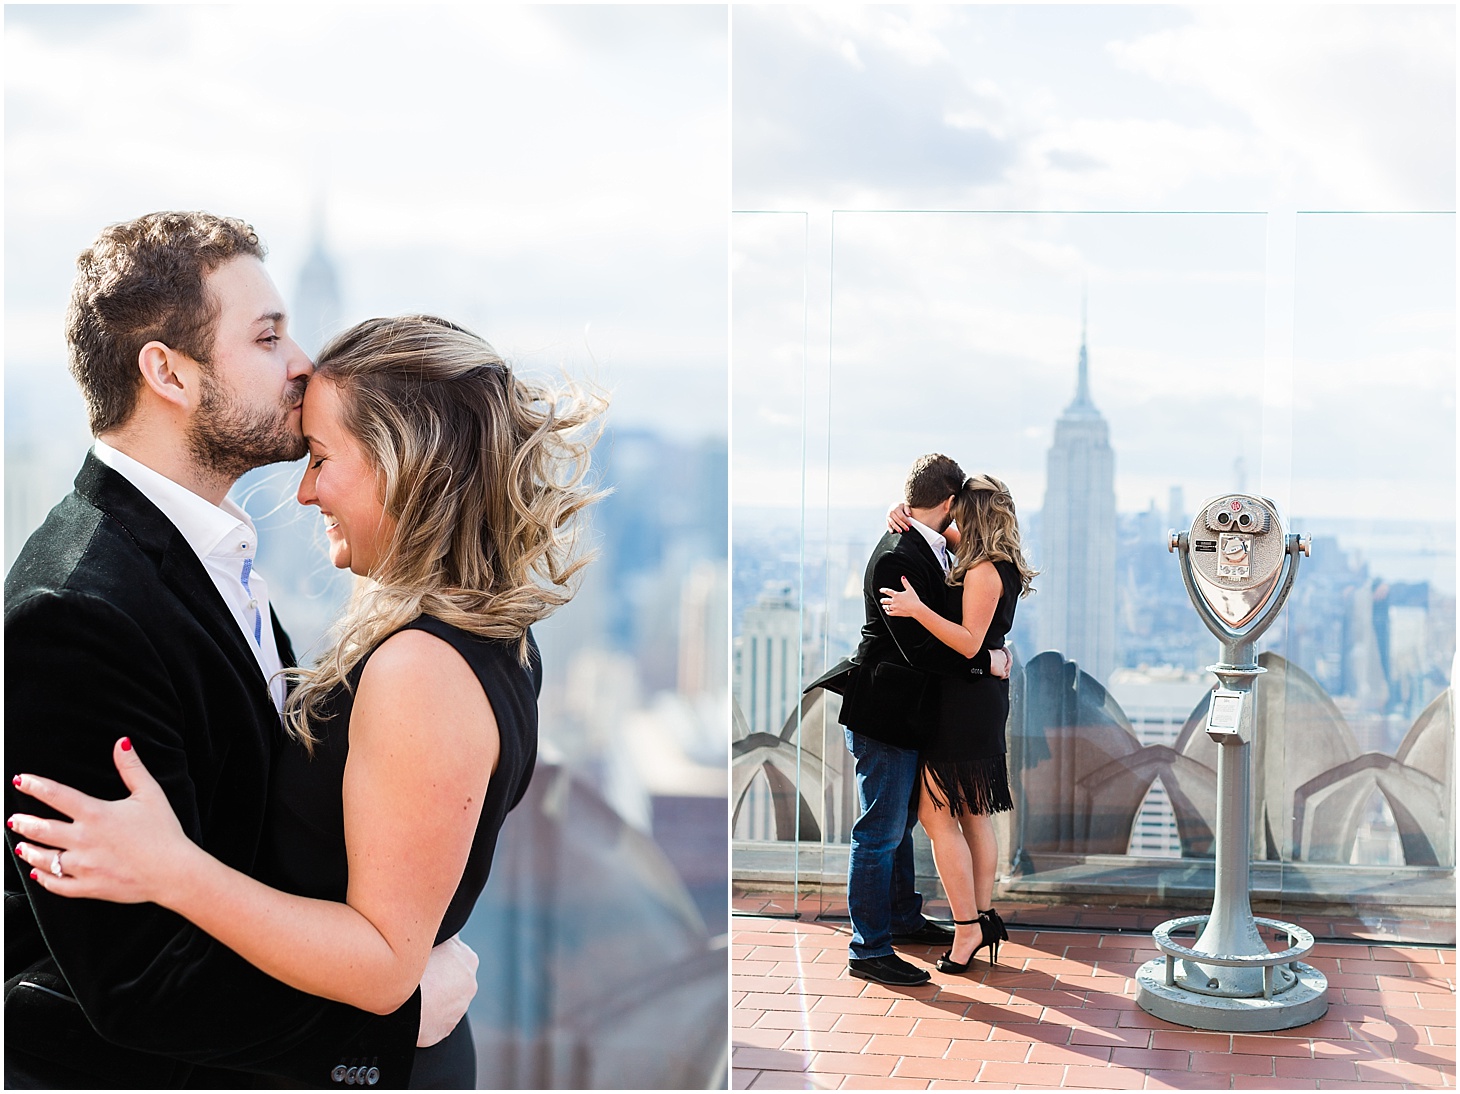 Engagement Portraits with New York City Skyline | Sunrise Engagement at the Brooklyn Bridge, Top of Rock, and Grand Central Station | Sarah Bradshaw Photography